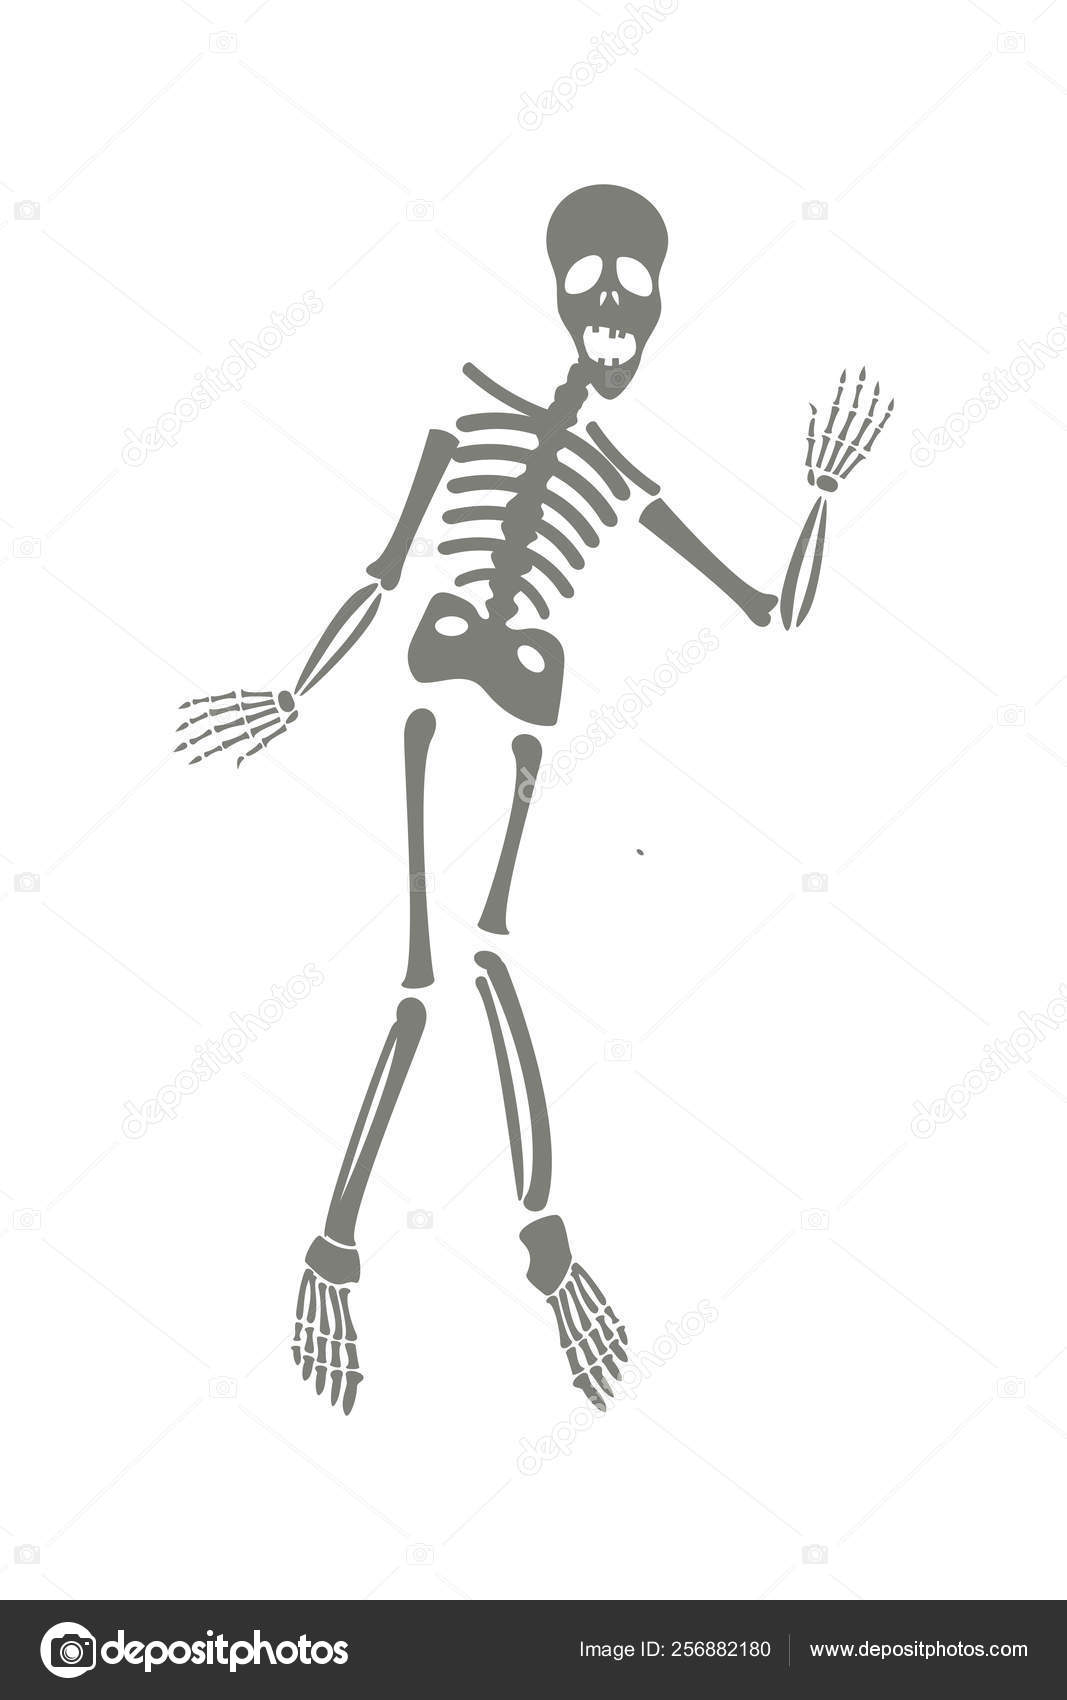 How to Draw a Halloween Skeleton and Make a Dancing Skeleton Display